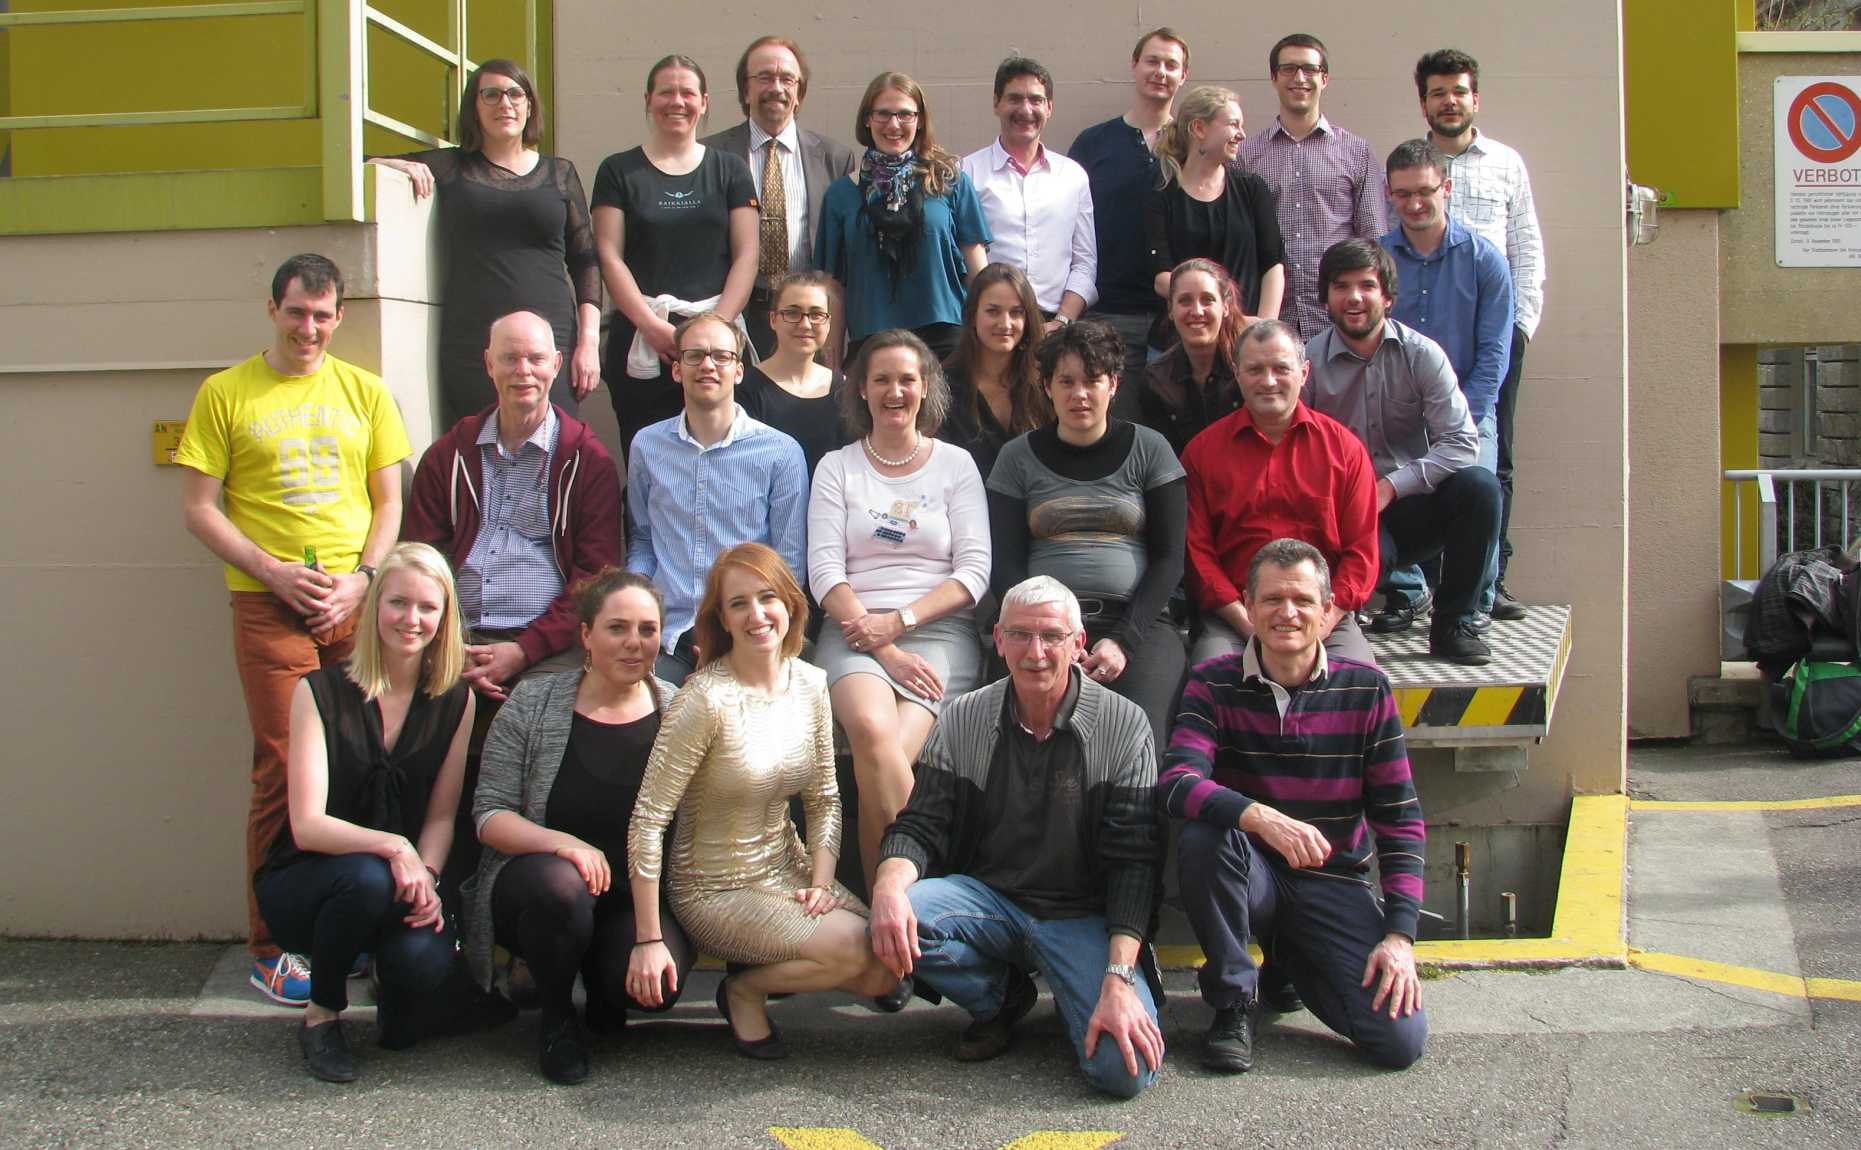 Enlarged view: The FPE group in April 2015